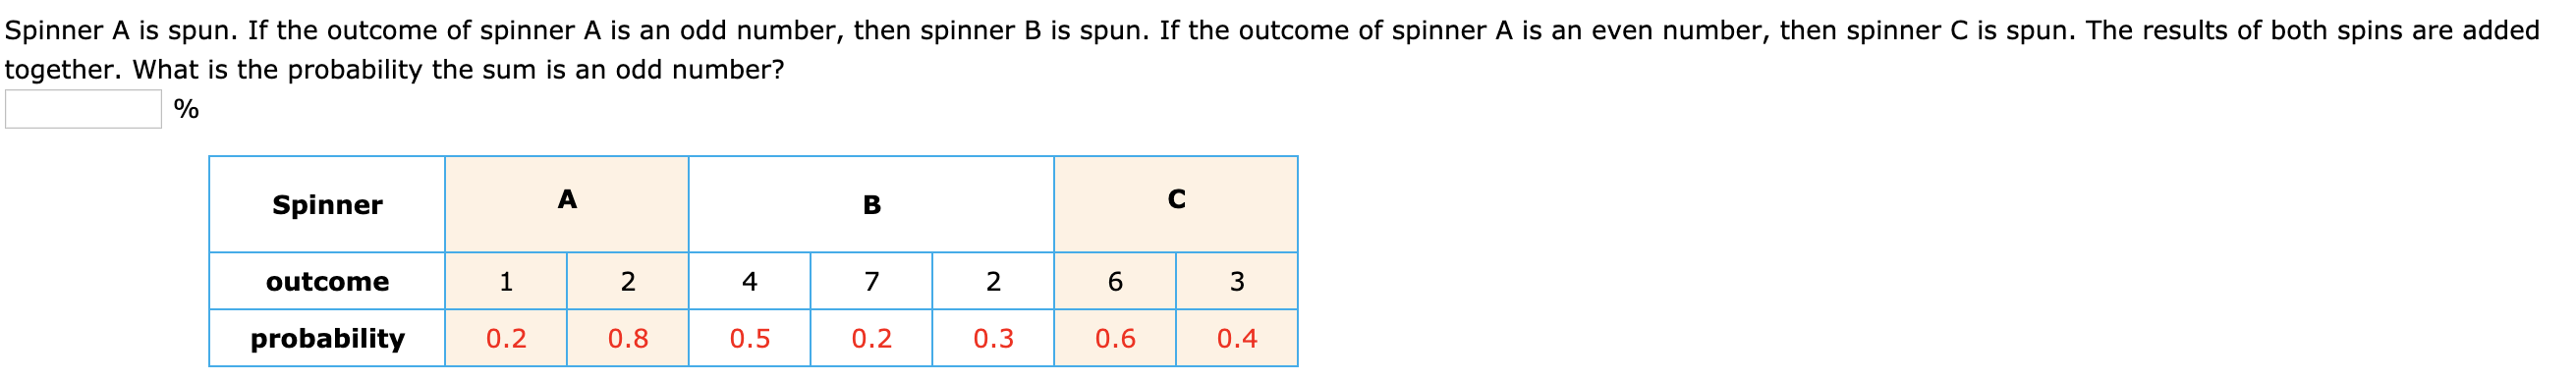 Spinner A is spun. If the outcome of spinner A is an odd number, then spinner B is spun. If the outcome of spinner A is an even number, then spinner C is spun. The results of both spins are added
together. What is the probability the sum is an odd number?
Spinner
3
outcome
2
4
2
probability
0.2
0.8
0.2
0.3
0.5
0.6
0.4
